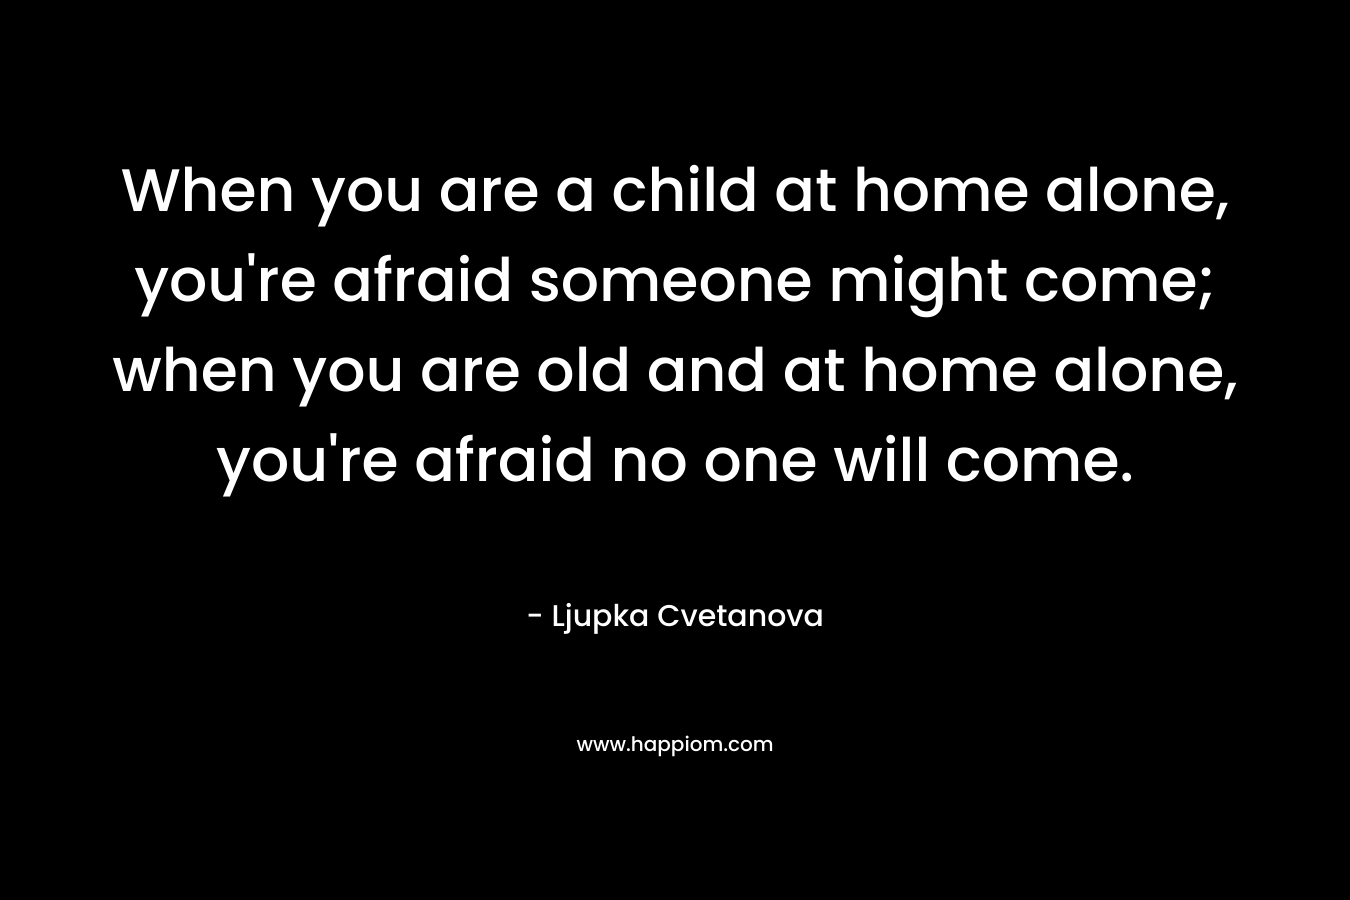 When you are a child at home alone, you're afraid someone might come; when you are old and at home alone, you're afraid no one will come.